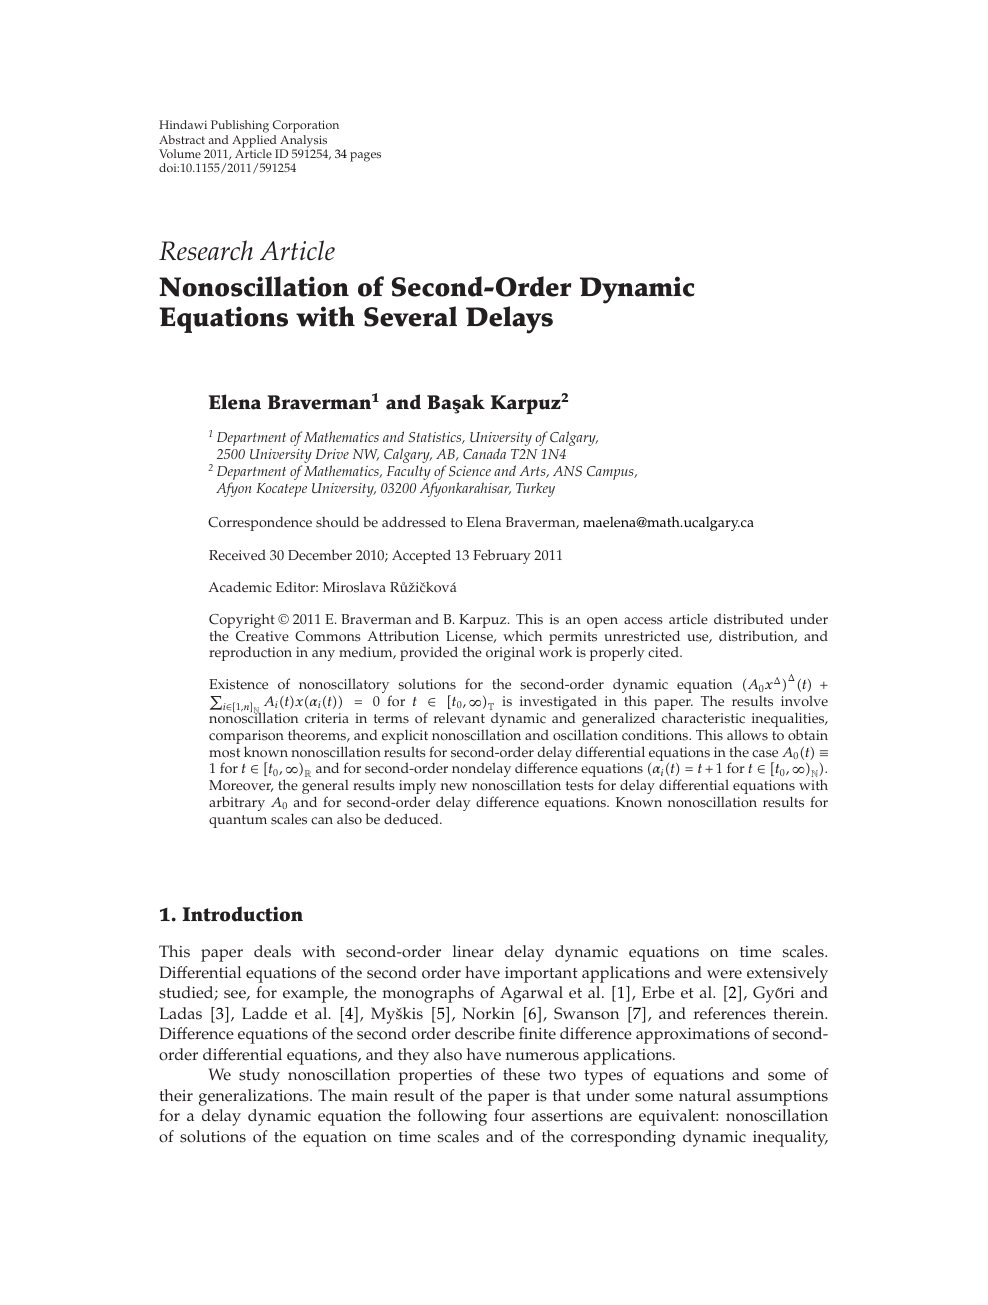 Nonoscillation Of Second Order Dynamic Equations With Several Delays Topic Of Research Paper In Mathematics Download Scholarly Article Pdf And Read For Free On Cyberleninka Open Science Hub